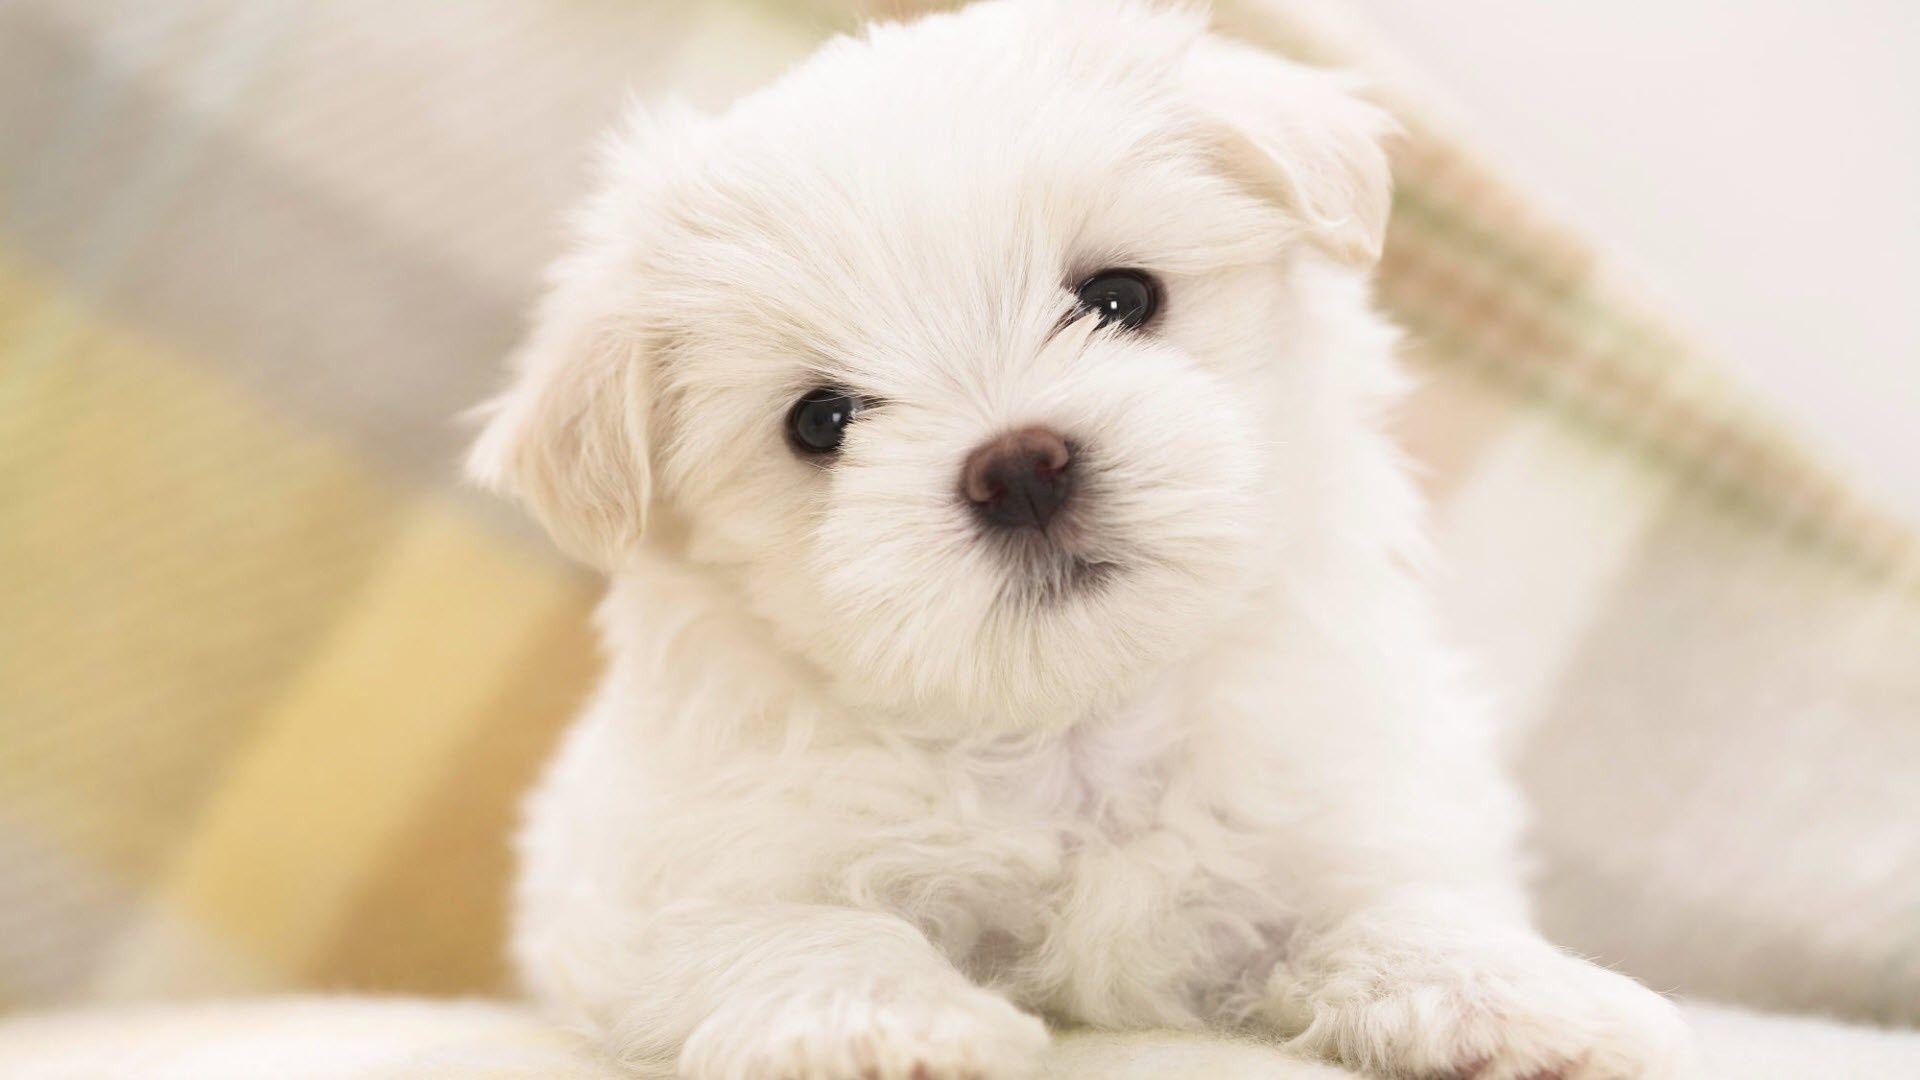 White Baby Dog Wallpapers